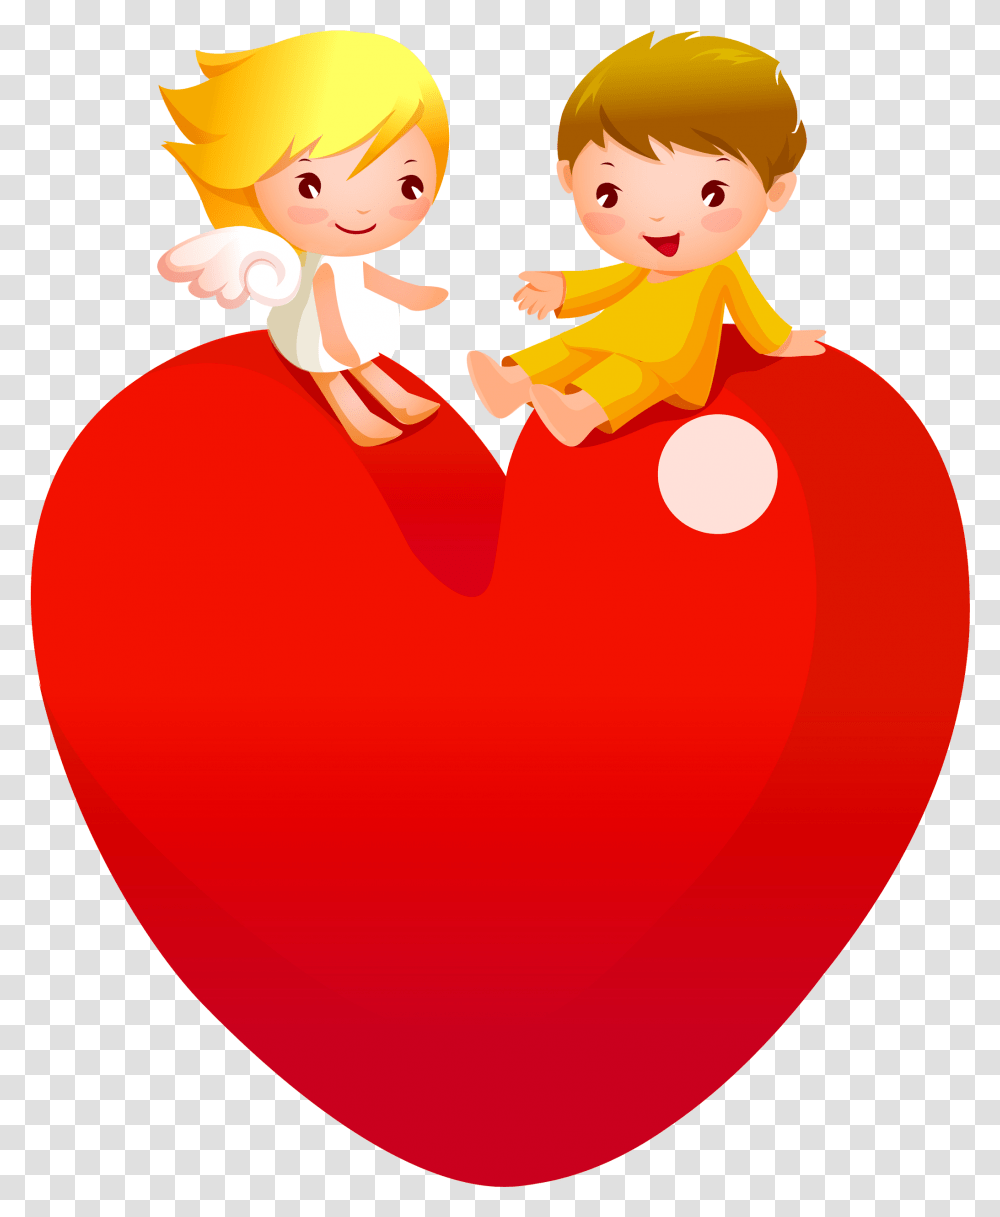 Red Heart With Angels Lady A New Whatsapp Dp Hd, Balloon, Cupid, Ketchup Transparent Png